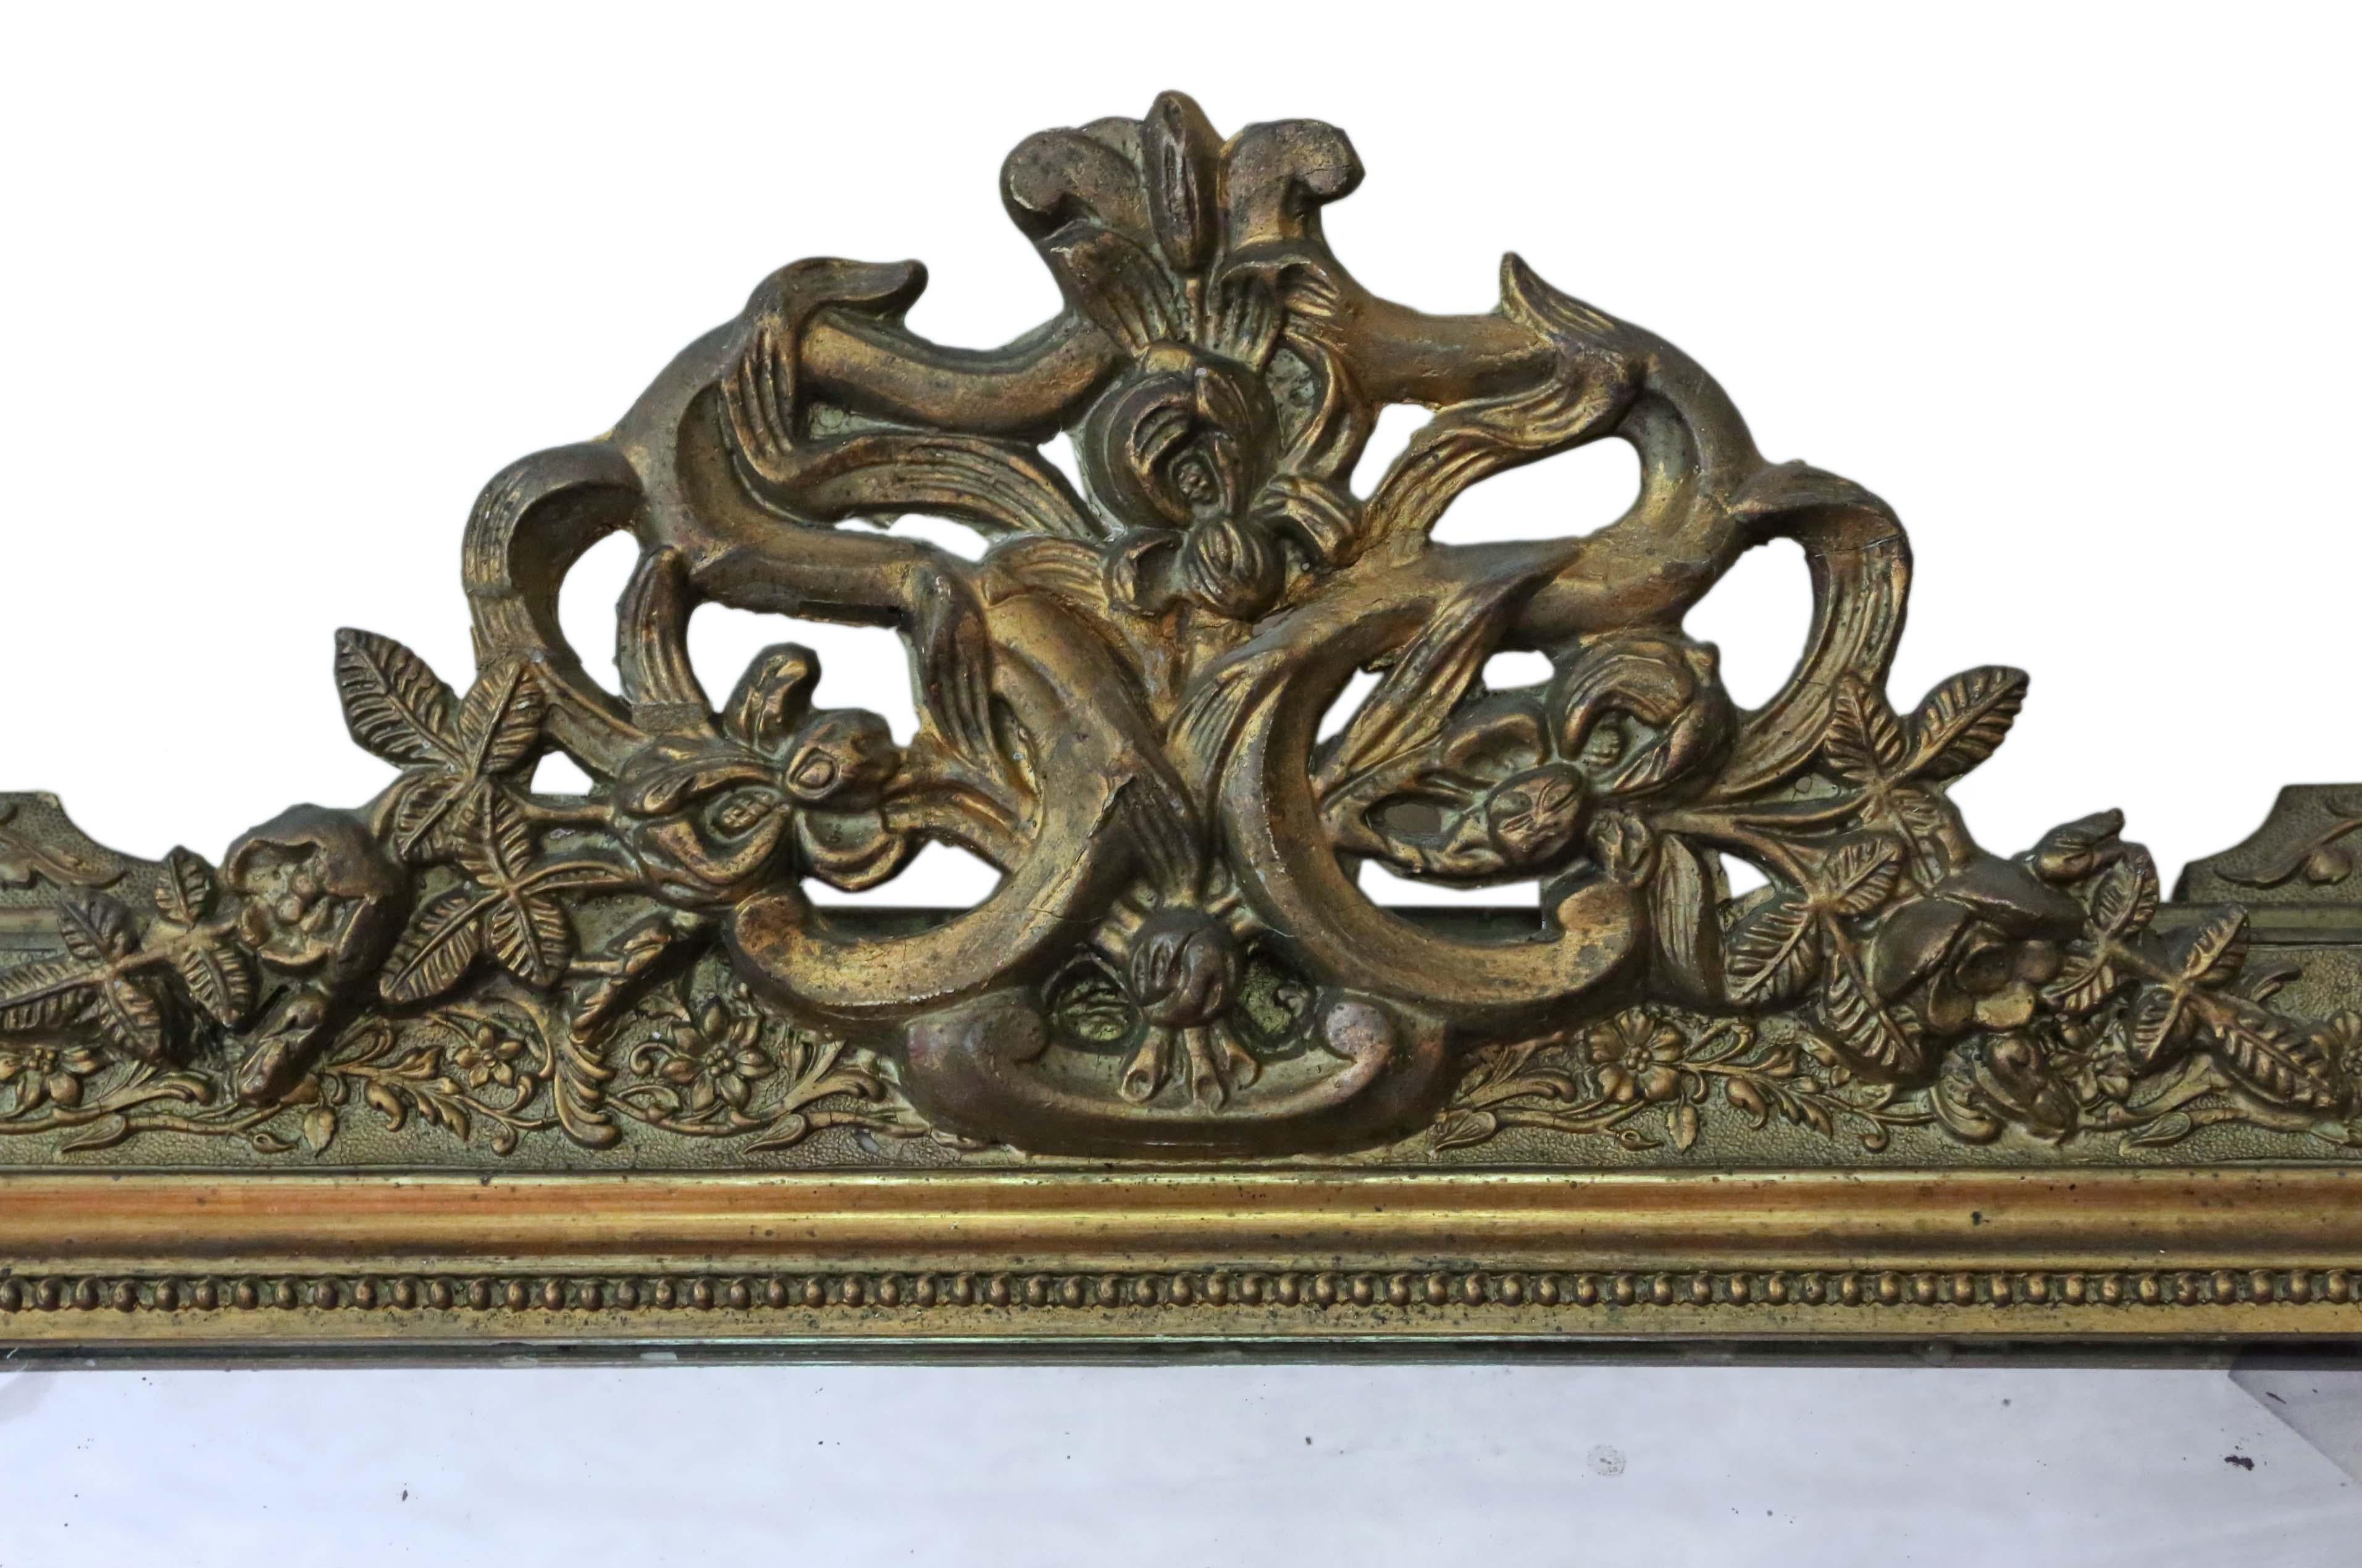 Victorian late 19th century French gilt overmantle or wall mirror. Lovely charm and elegance.
An impressive and rare find, that would look amazing in the right location. No woodworm.
The original mirrored glass has light to medium oxidation and